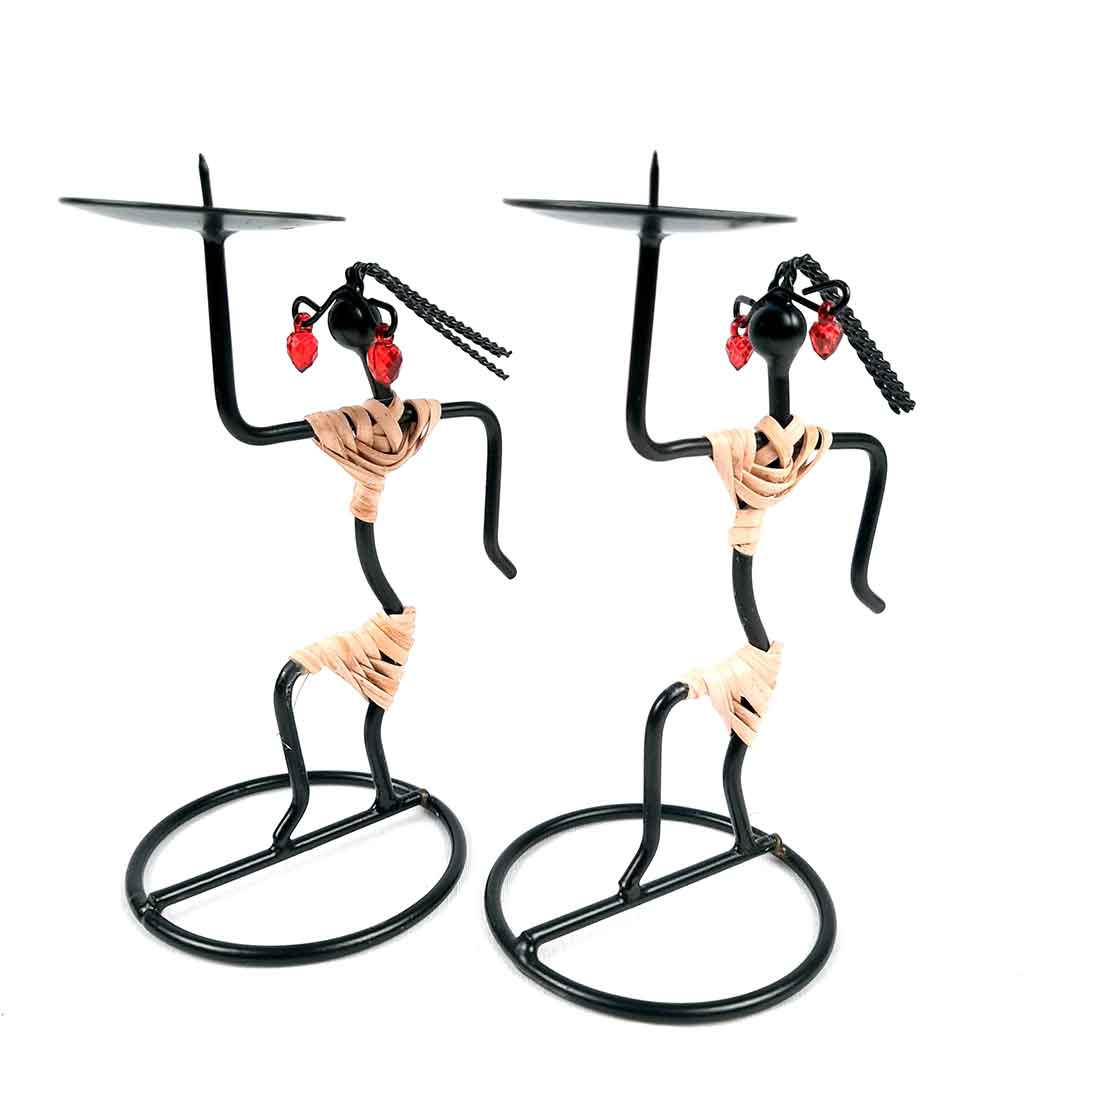 Candle Holder Stand | TeaLight Holder With One Slots Cum Showpiece  | Tea Light Candle Stands - Dancing Lady Design - For Home, Table, Living Room, Dining room, Bedroom Decor | For Diwali Decoration & Gifts - Set of 2